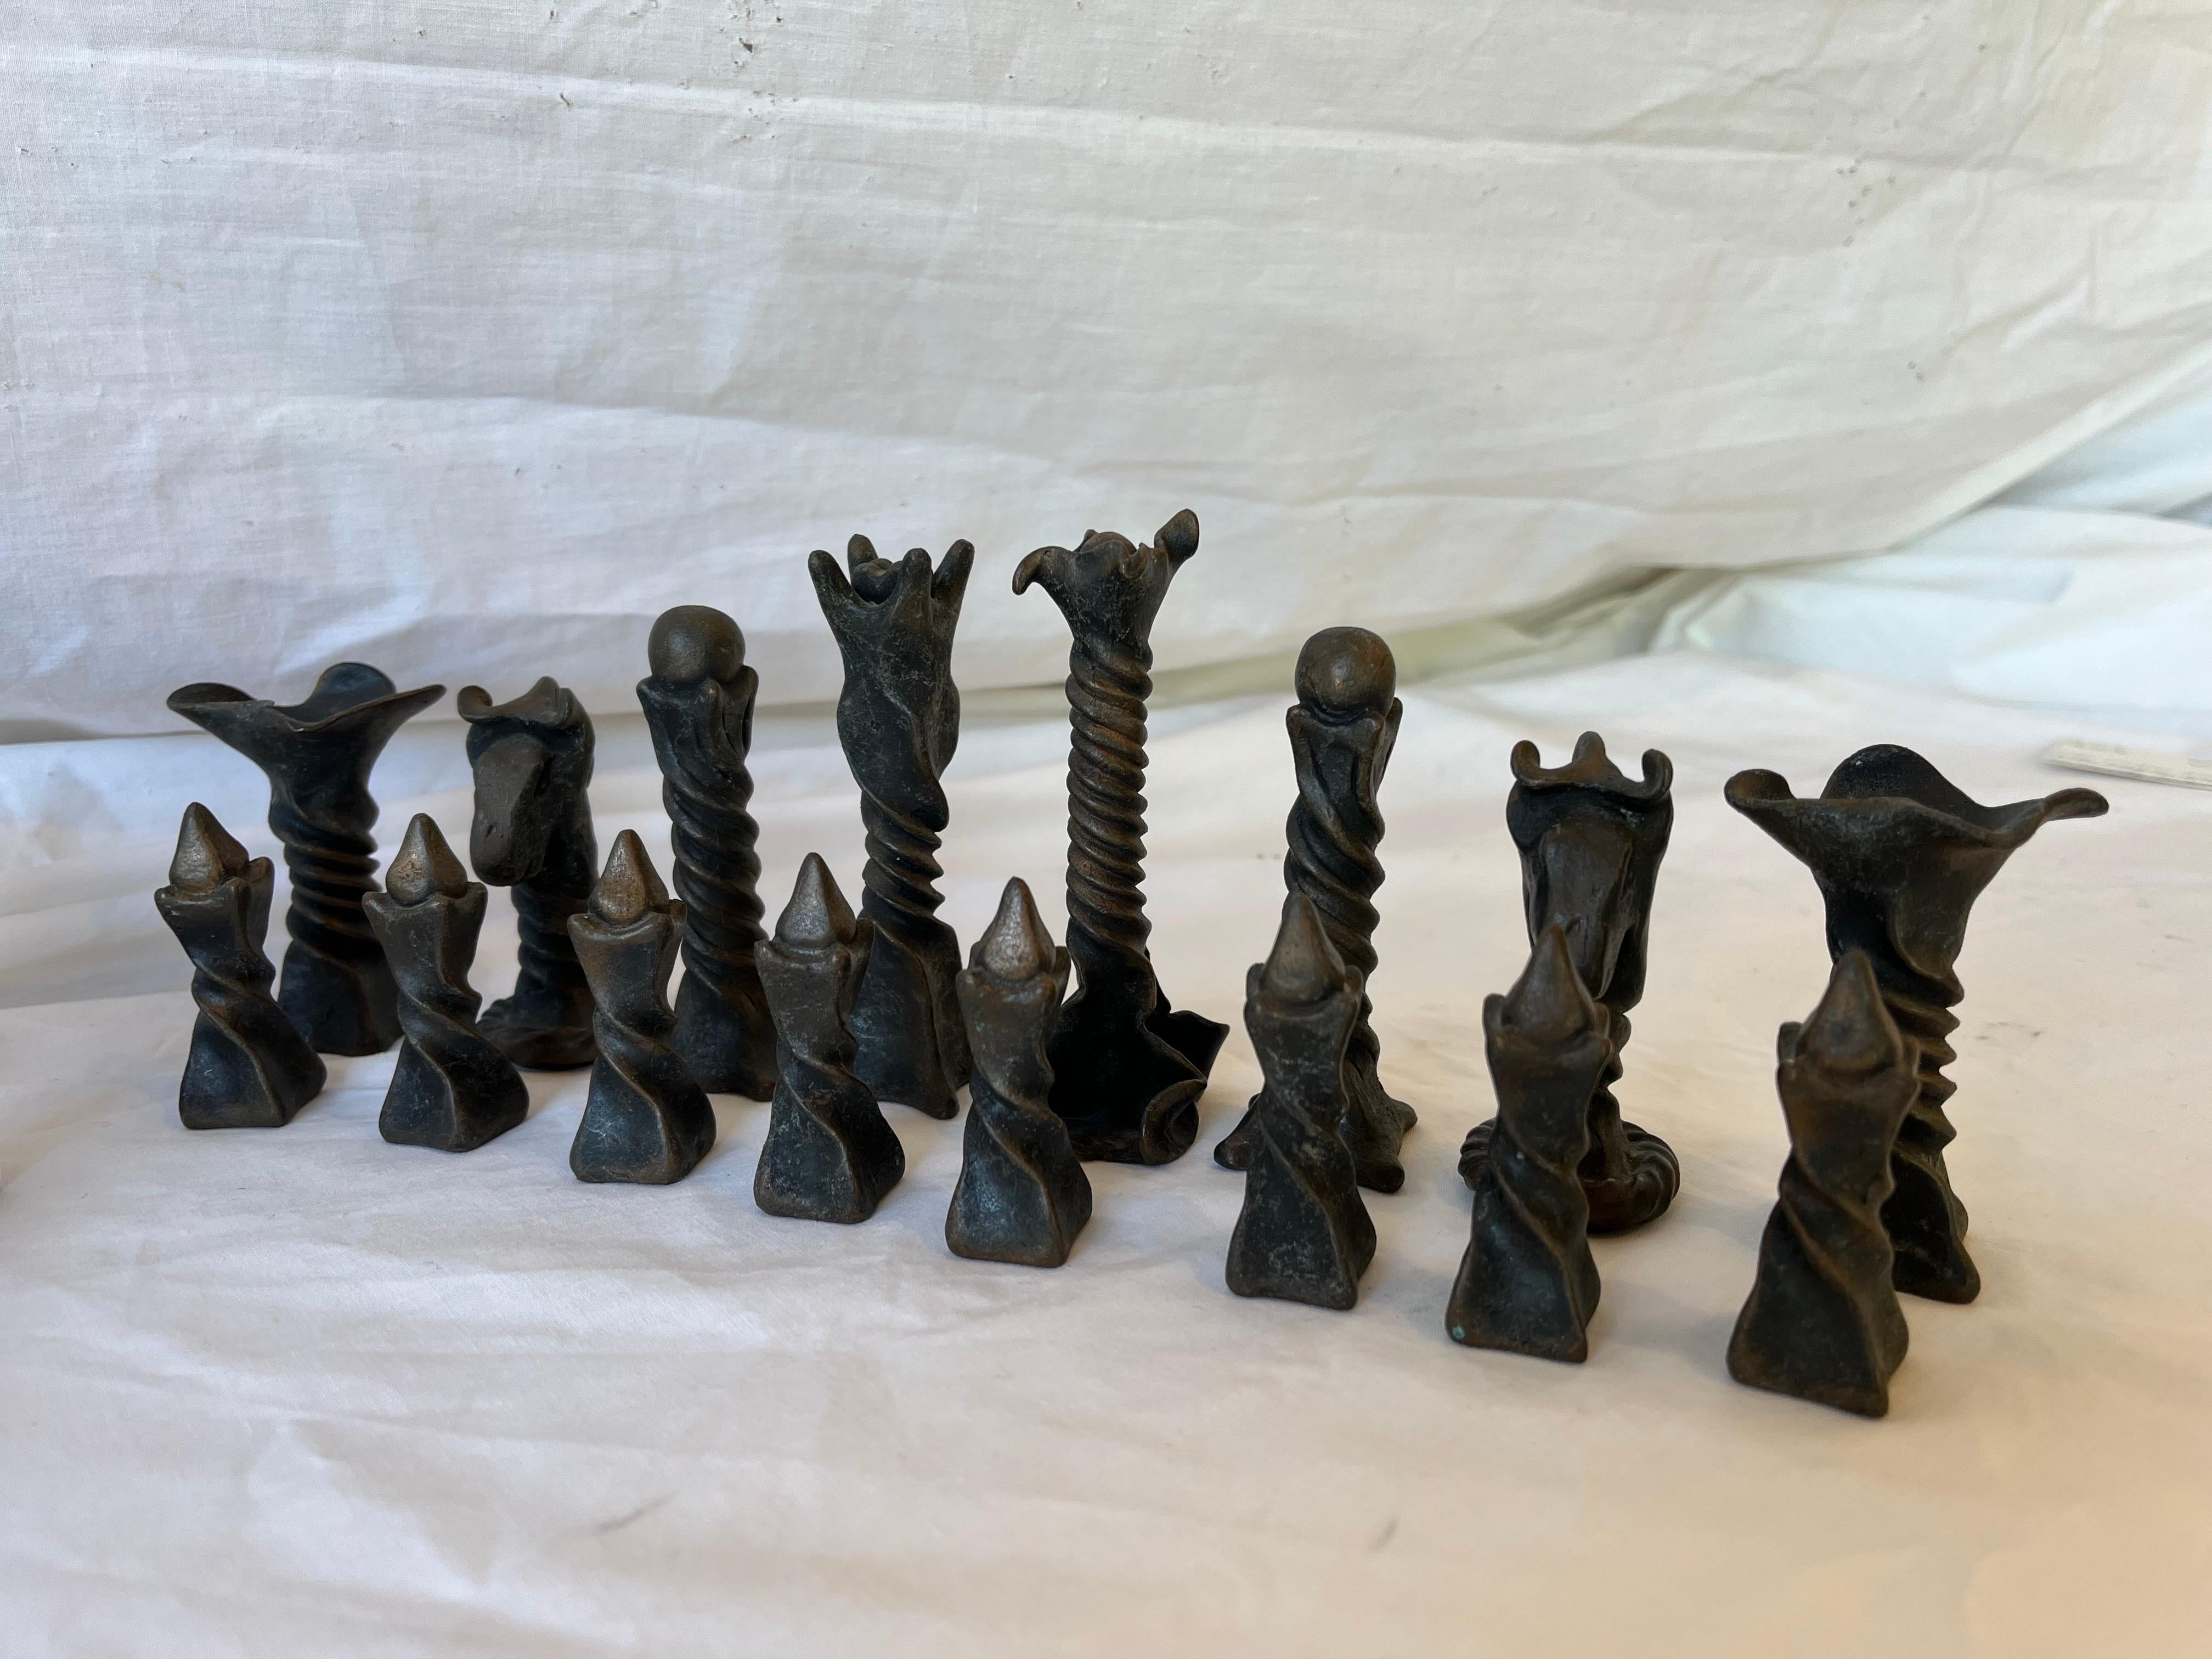 Vintage Brutalist Style Cast Metal Chess Set with Twisted and Flanged Design 11